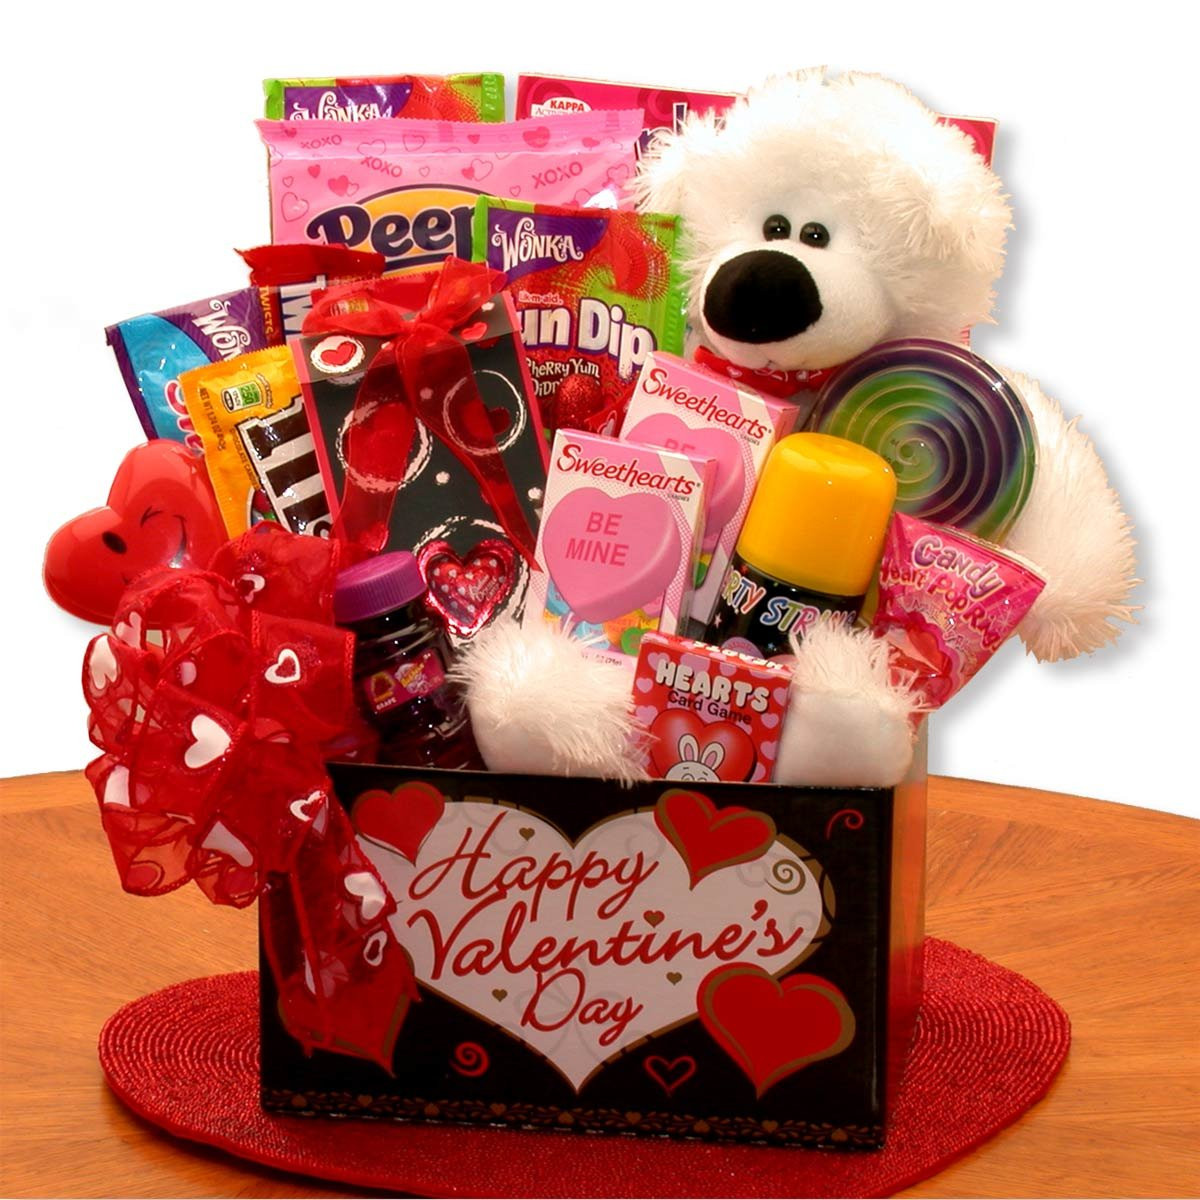 Valentines Gift For Her Ideas
 Cute His & Her Valentine Gift Ideas For Your Loved es